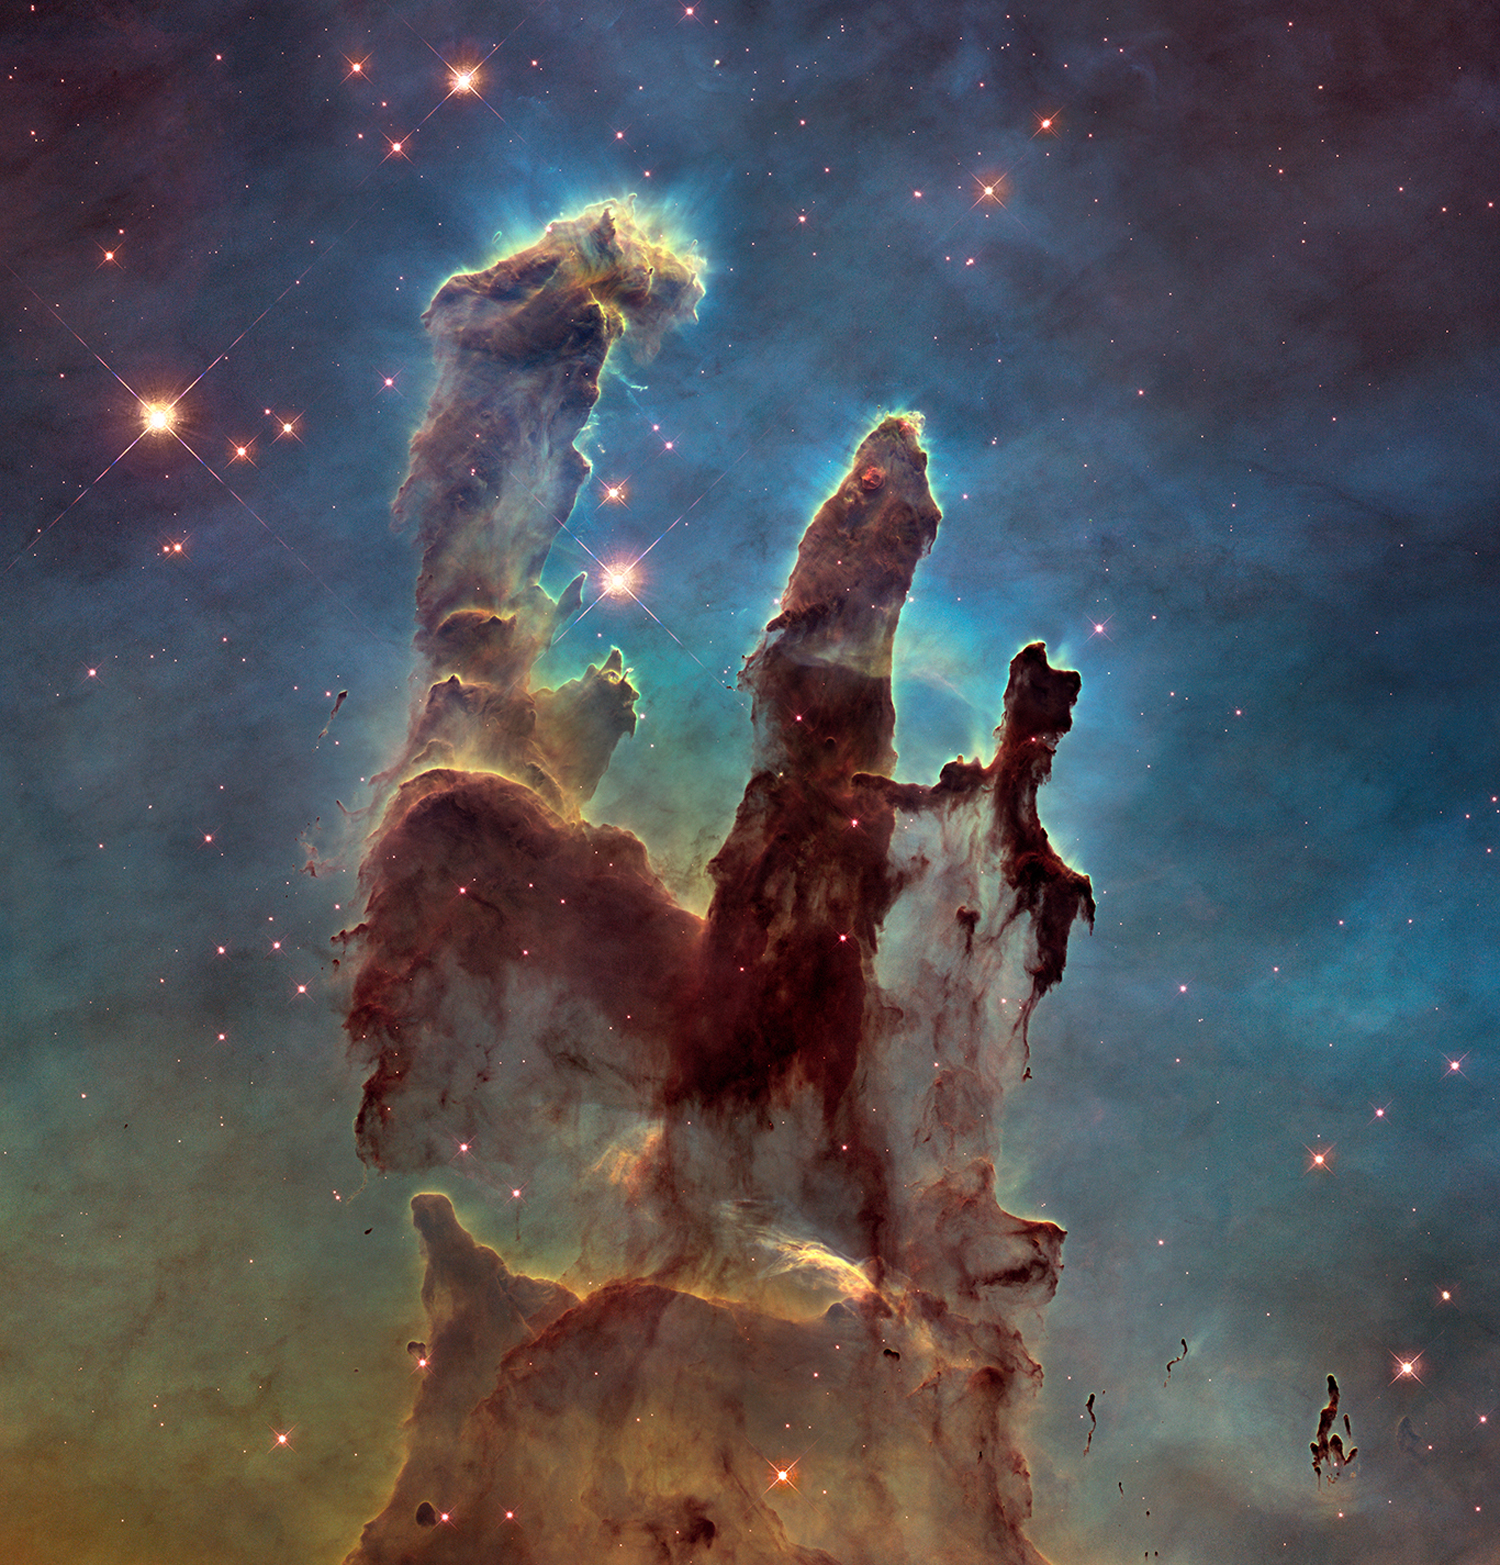 New stars are being born in these towers of gas and dust, called the Pillars of Creation, in the Eagle Nebula. It's an iconic image and one of our top space images of all time.